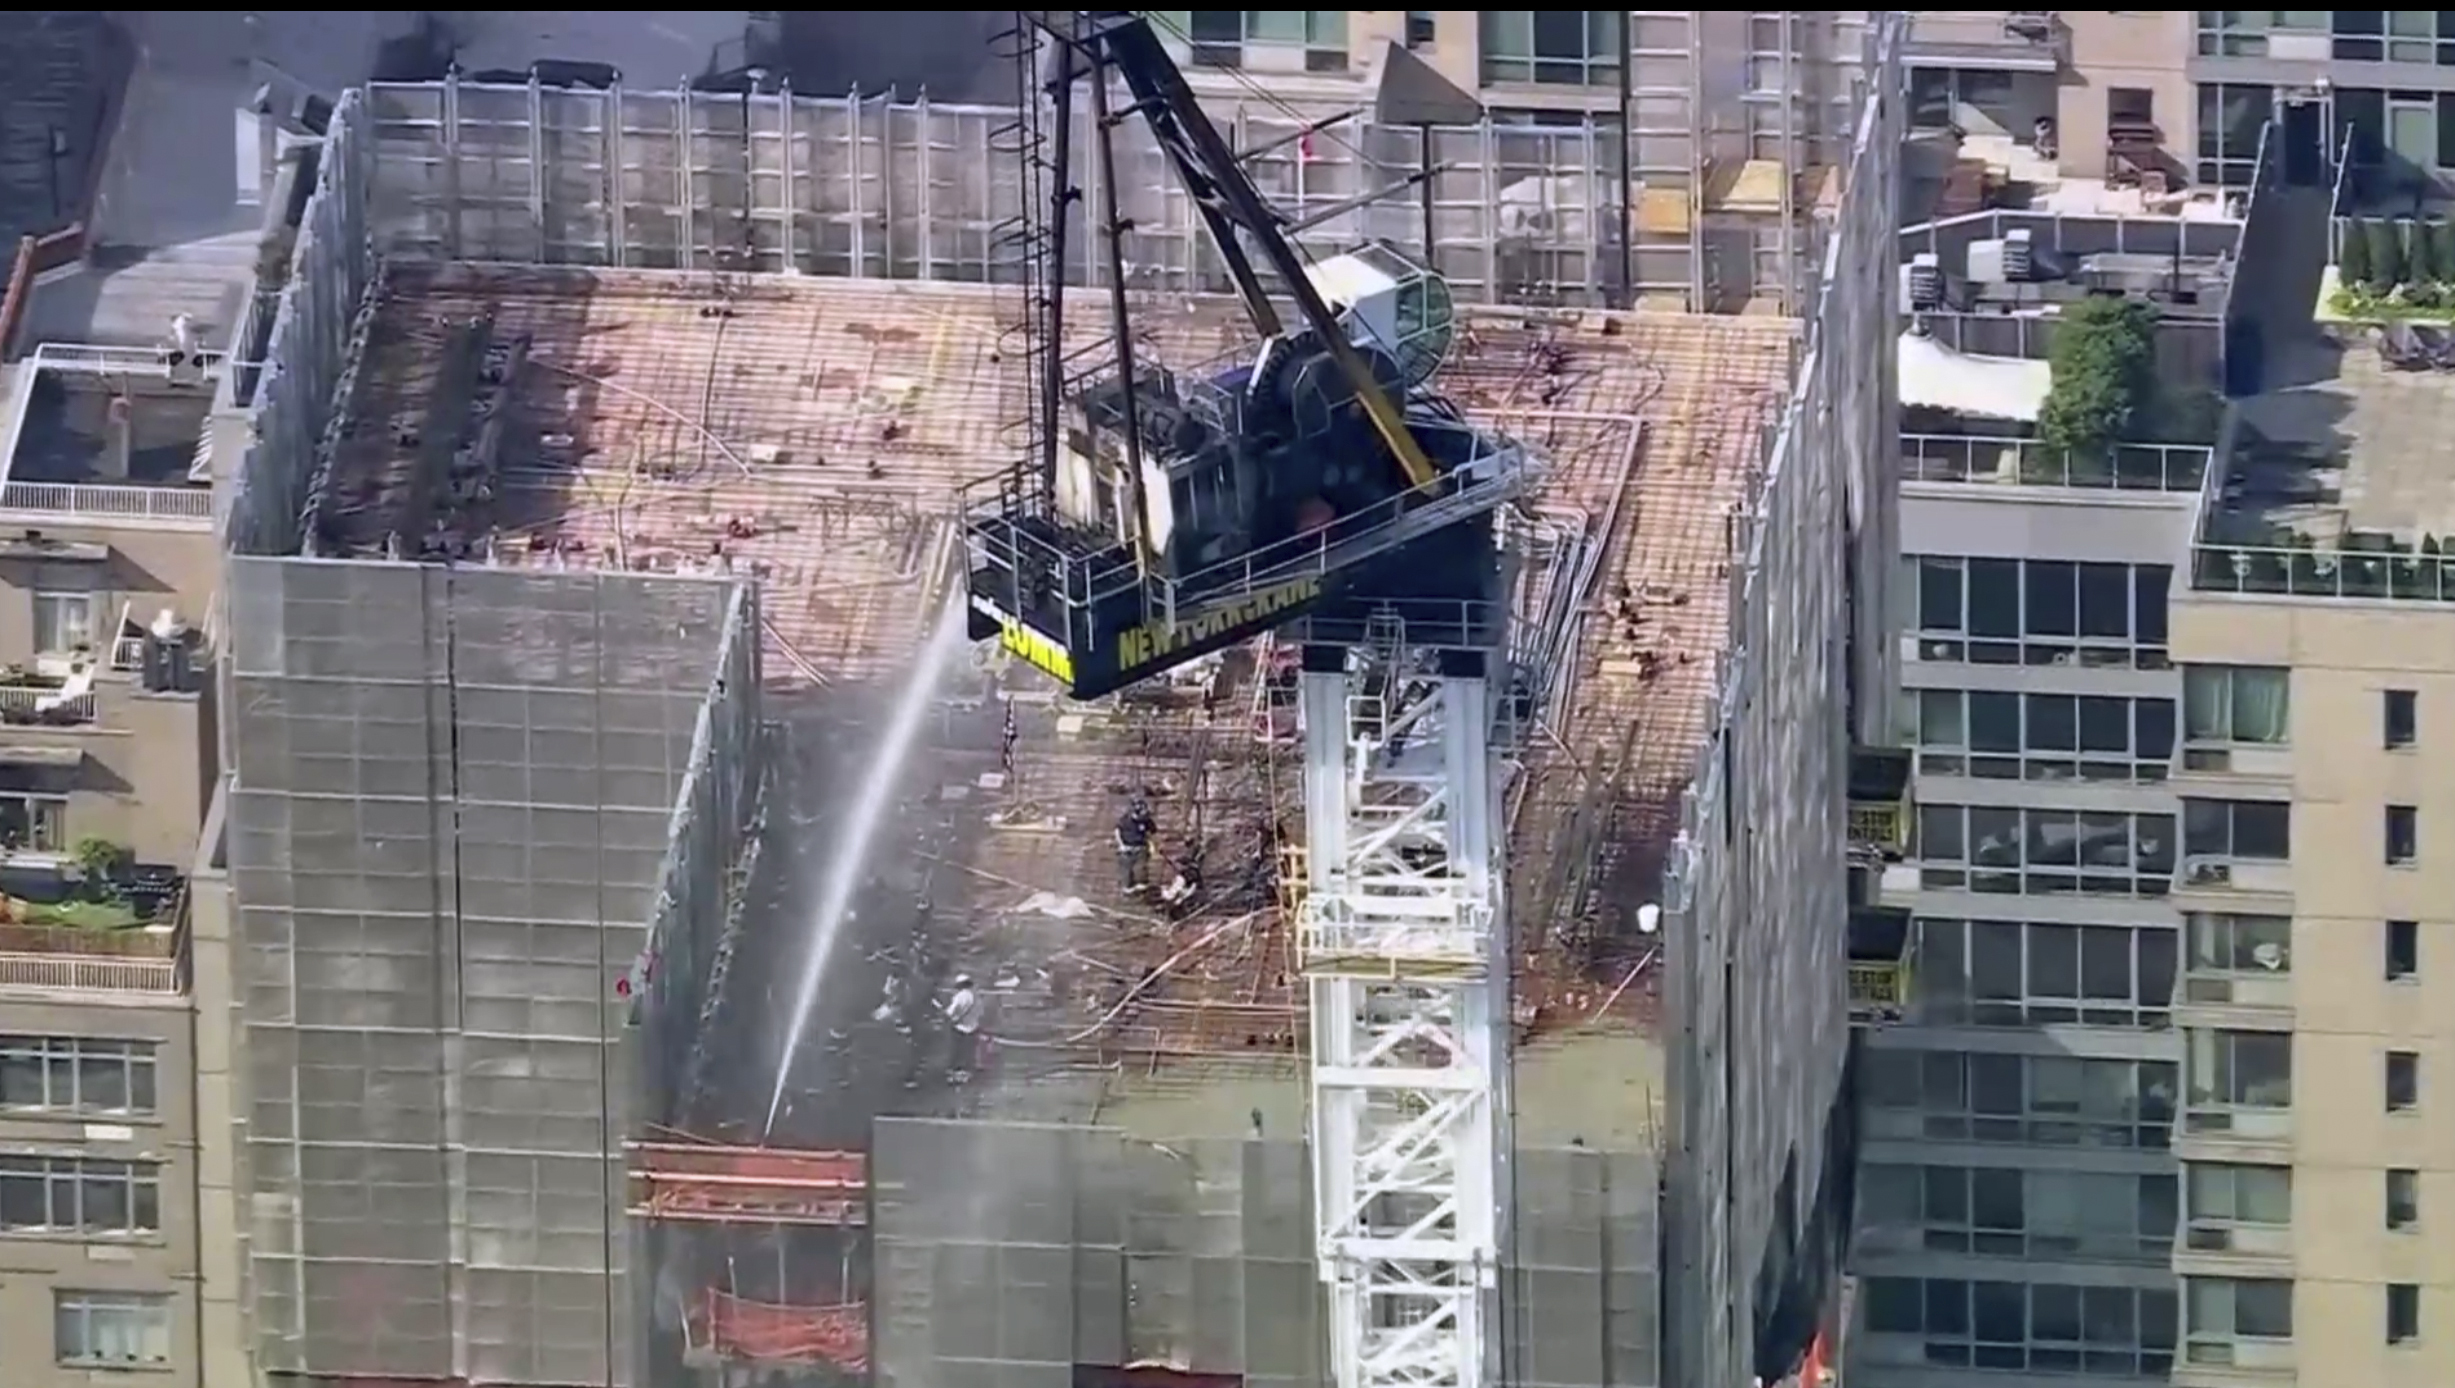 Emergency responders are on the scene after a large construction crane caught fire in Manhattan on ...